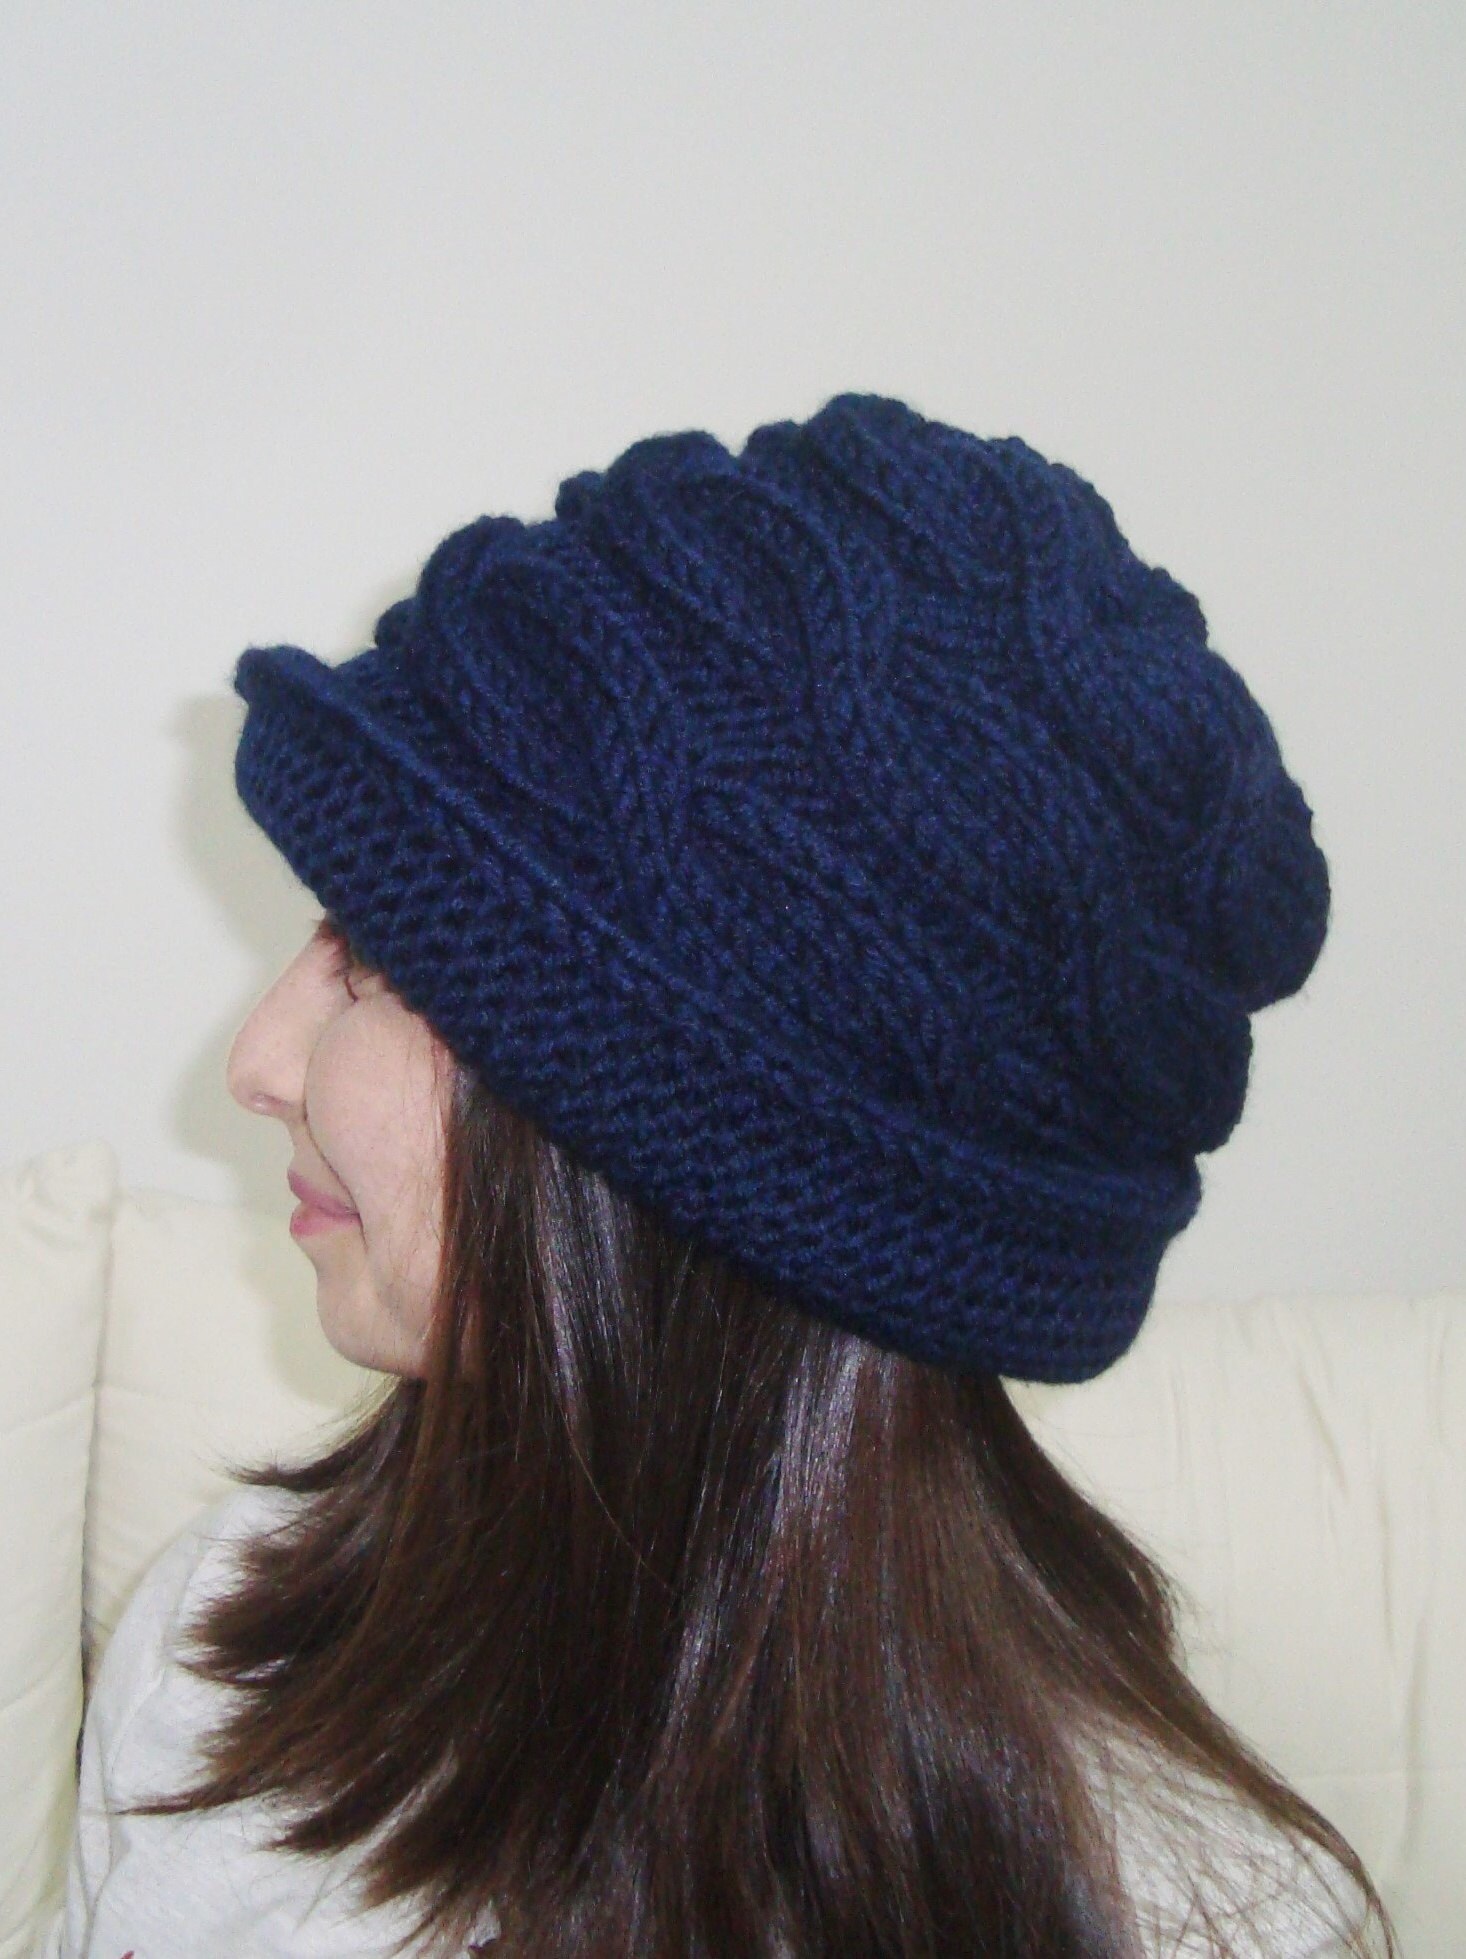 Women's Hats Winter Womens Hats With Brim Cloche in Navy Blue Hand Knitted  Hats, Women Gifts for Her Mom Gifts Hand Knit S, M, L, XL Hats -  New  Zealand